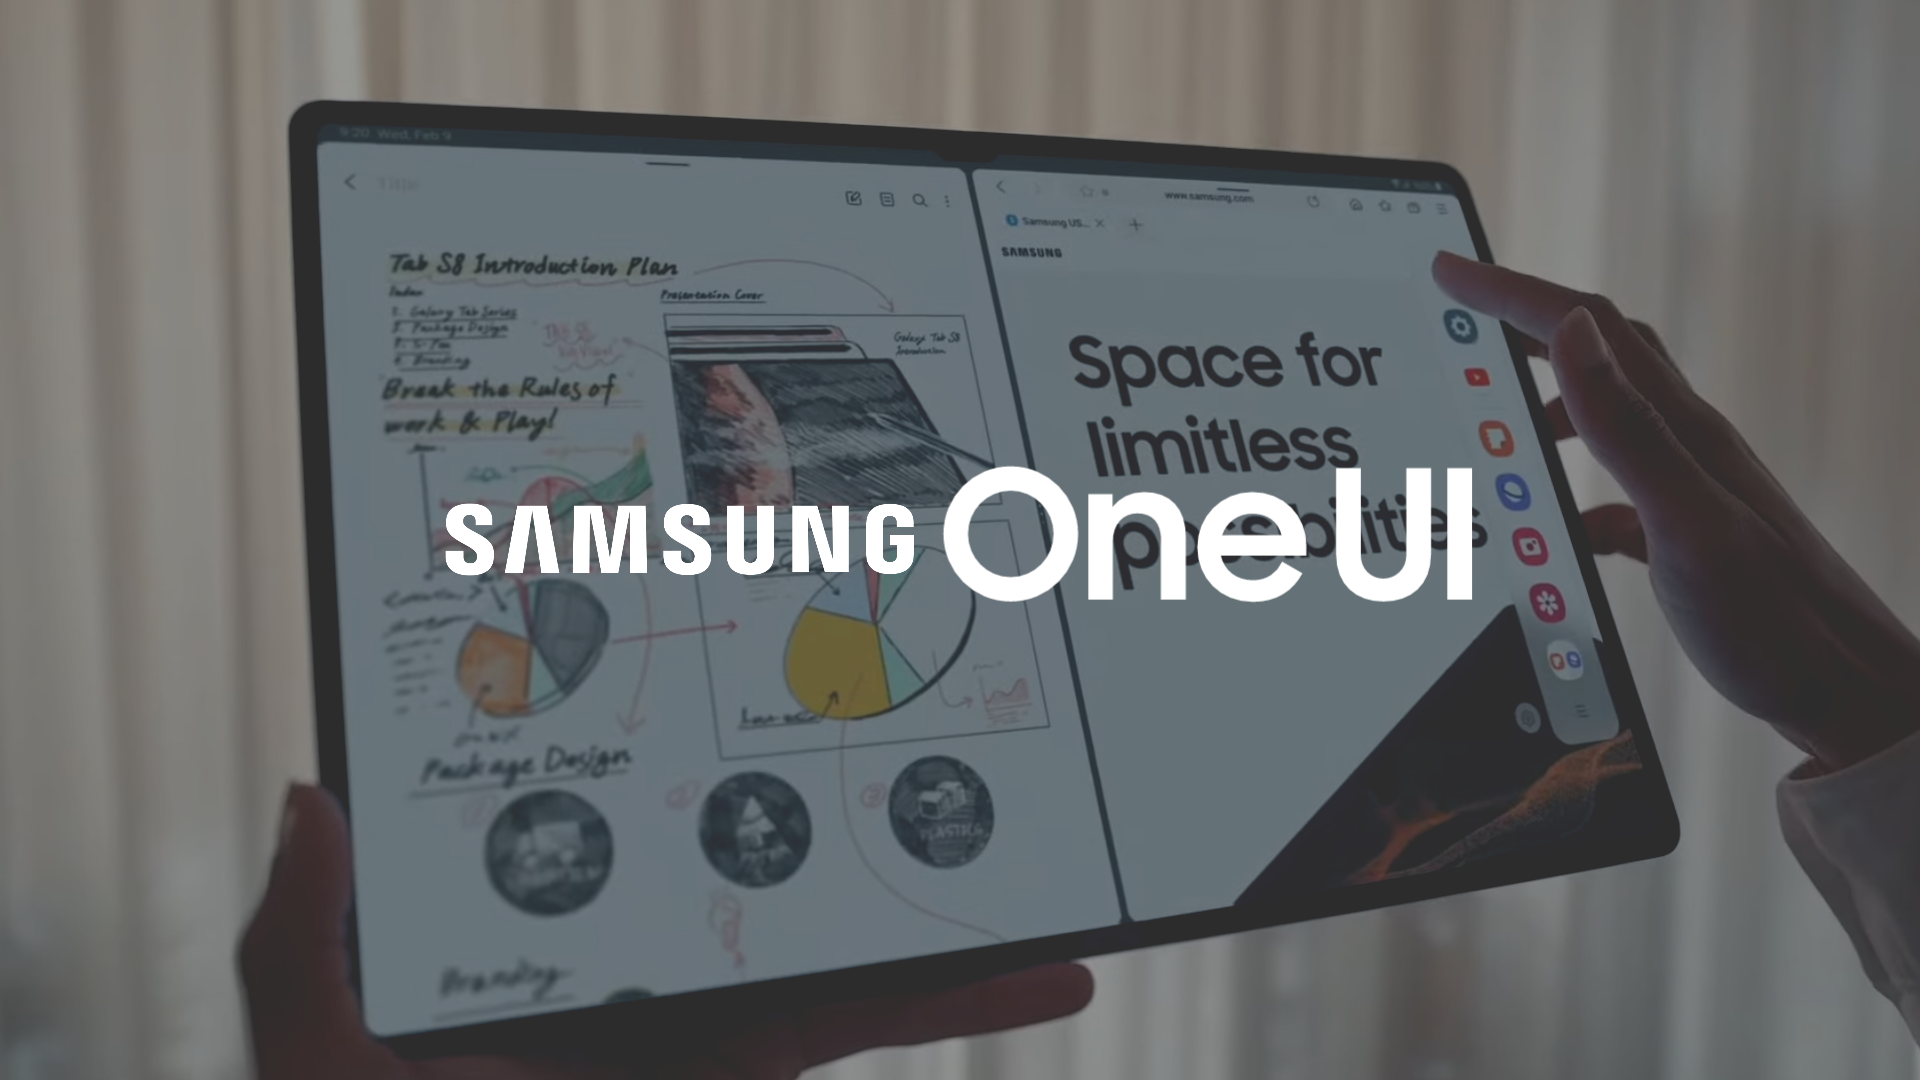 Samsung One UI explained: Everything to know about the Android skin